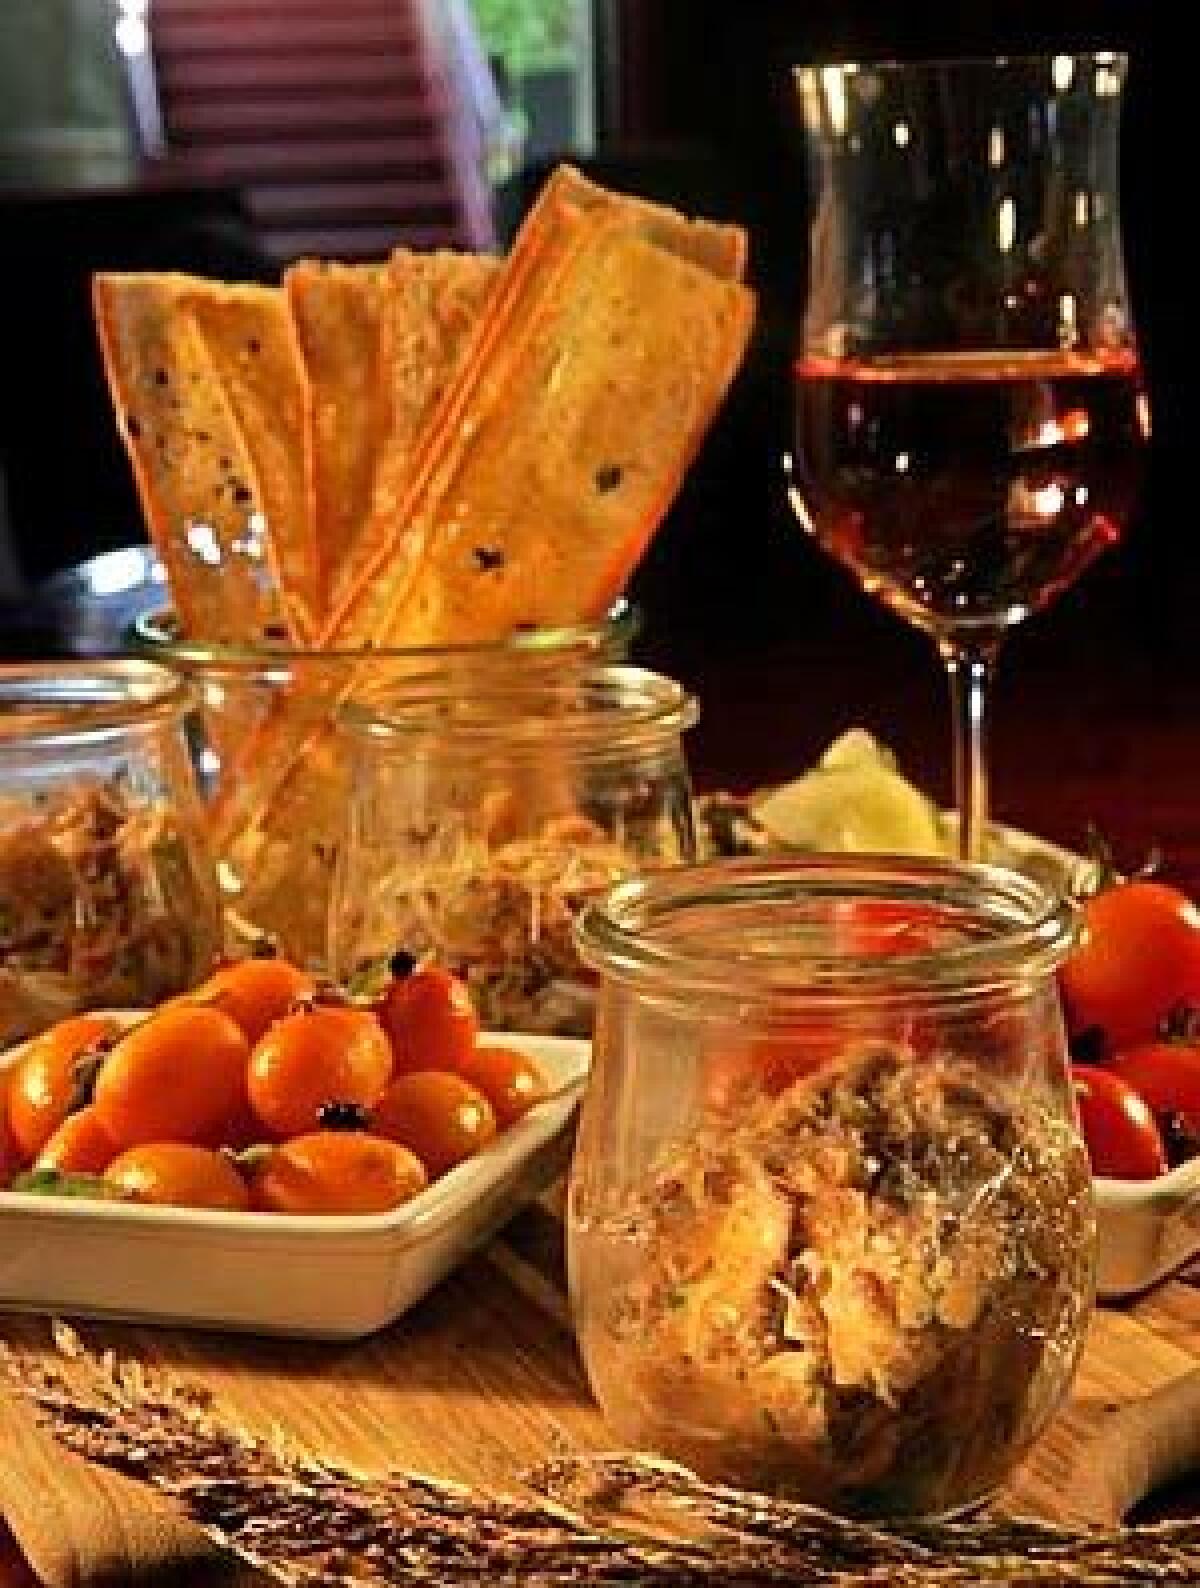 POTTED: Lamb rillettes served in a glass pot with a basket of wafer-thin toasted bread at Palate Food + Wine in Glendale.